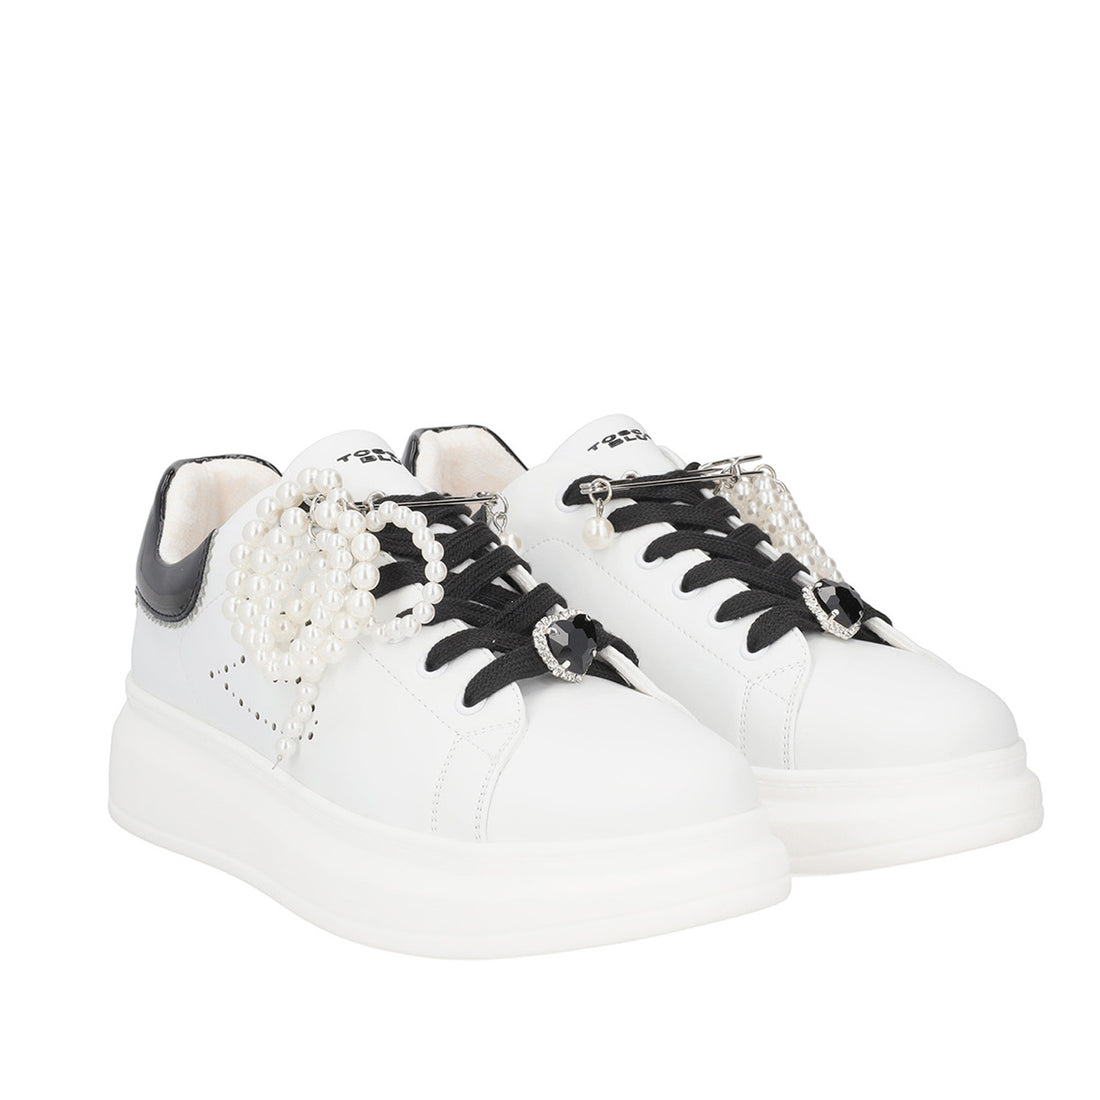 WHITE/BLACK GLAMOUR SNEAKER WITH PIN AND PEARLS IN LEATHER